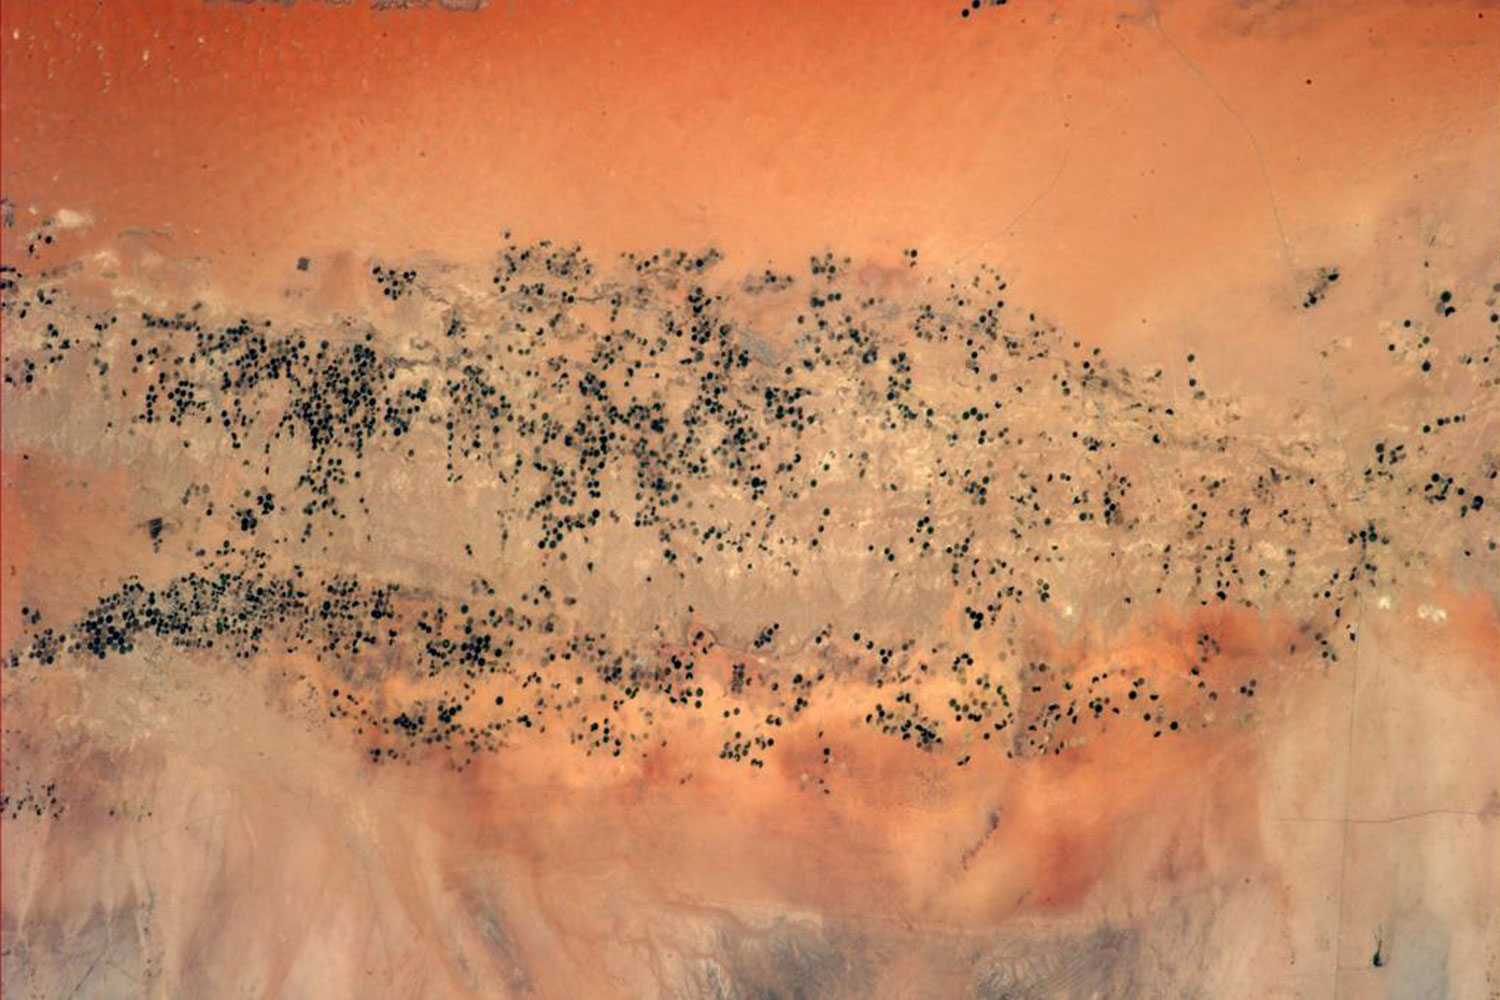 Irrigation in the #Sahara #Desert looks like a challenging task from up here... #BlueDot